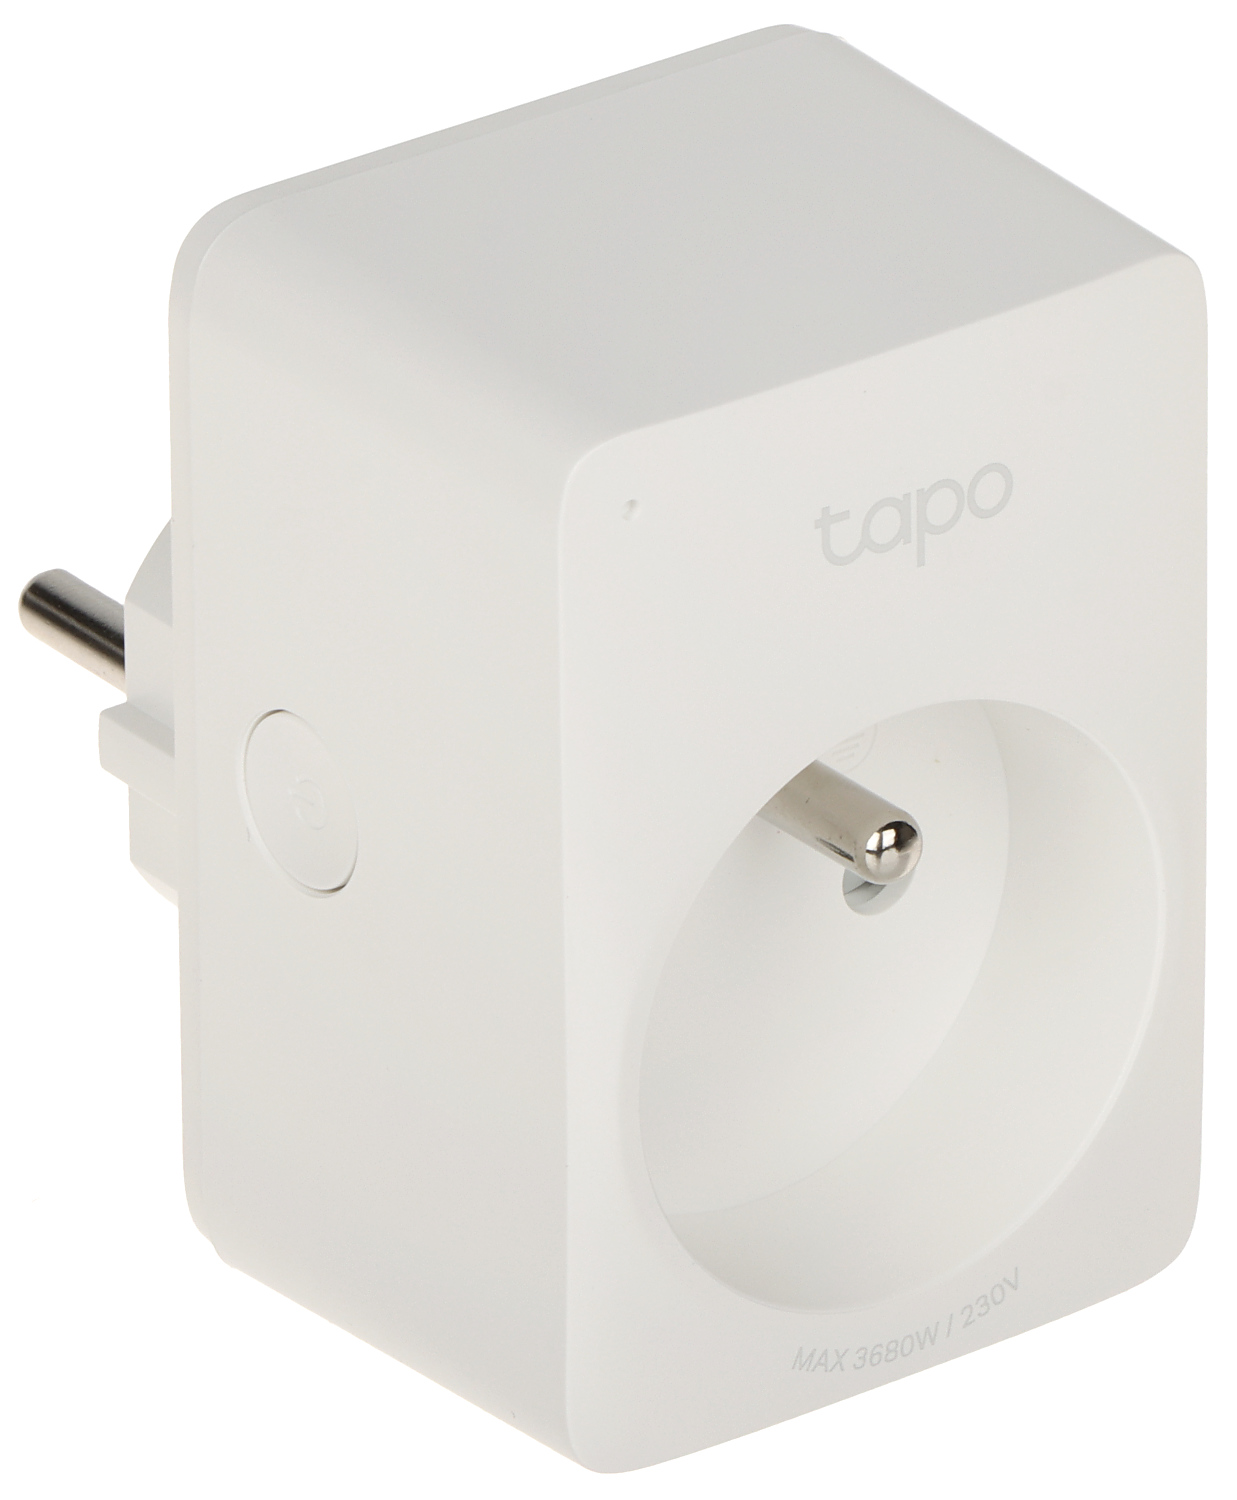 tp-link Tapo Mini Smart Wi-Fi Socket P110 - Buy Online with